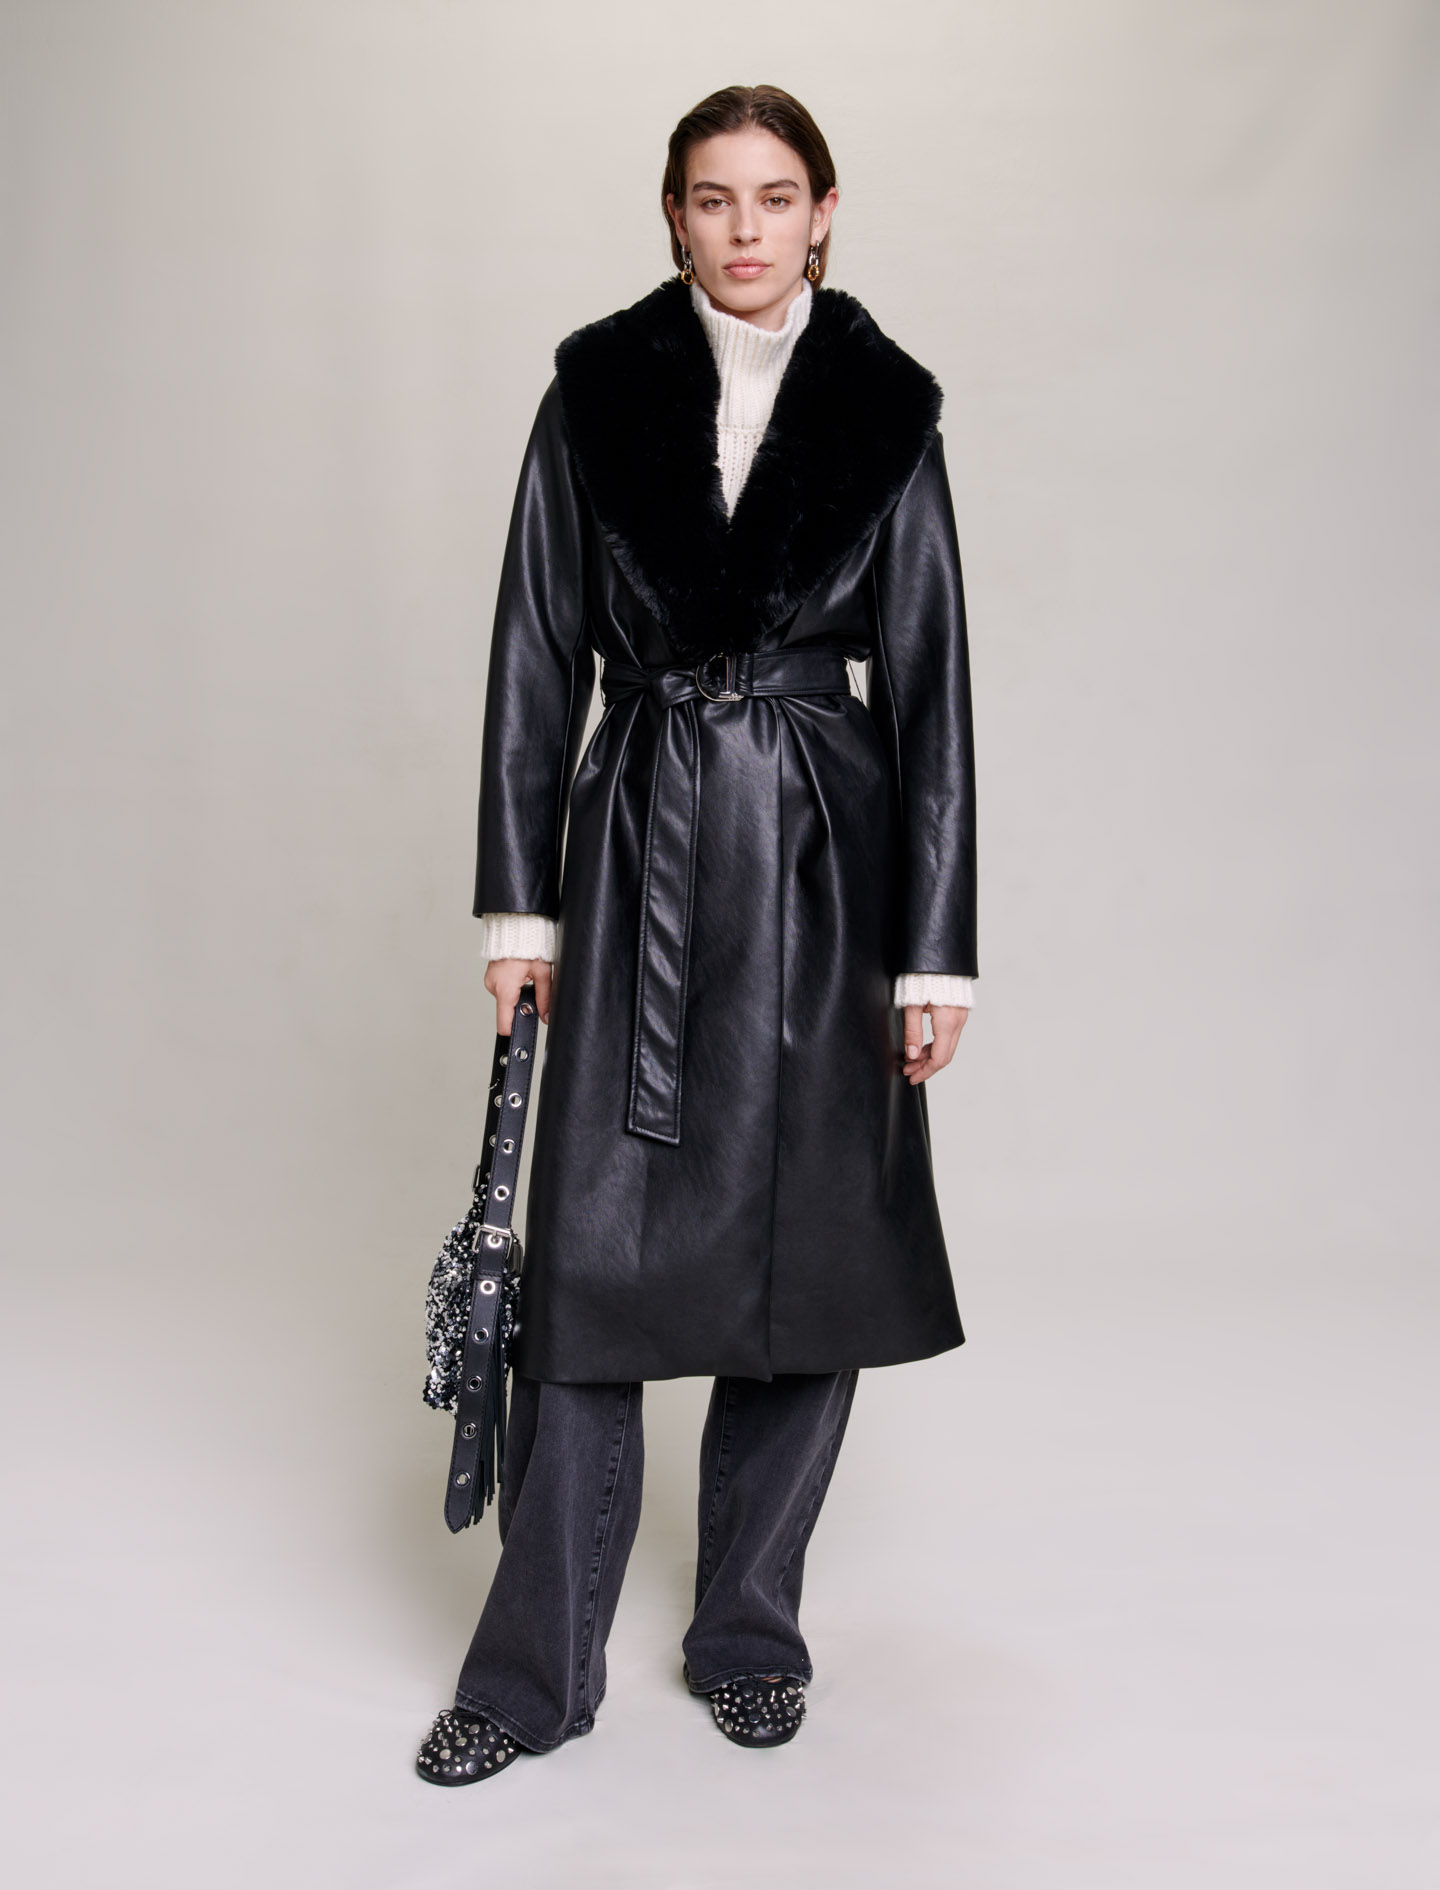 Maje Woman's polyurethane Fusible interfacing: Long leather-effect coat, in color Black / Black